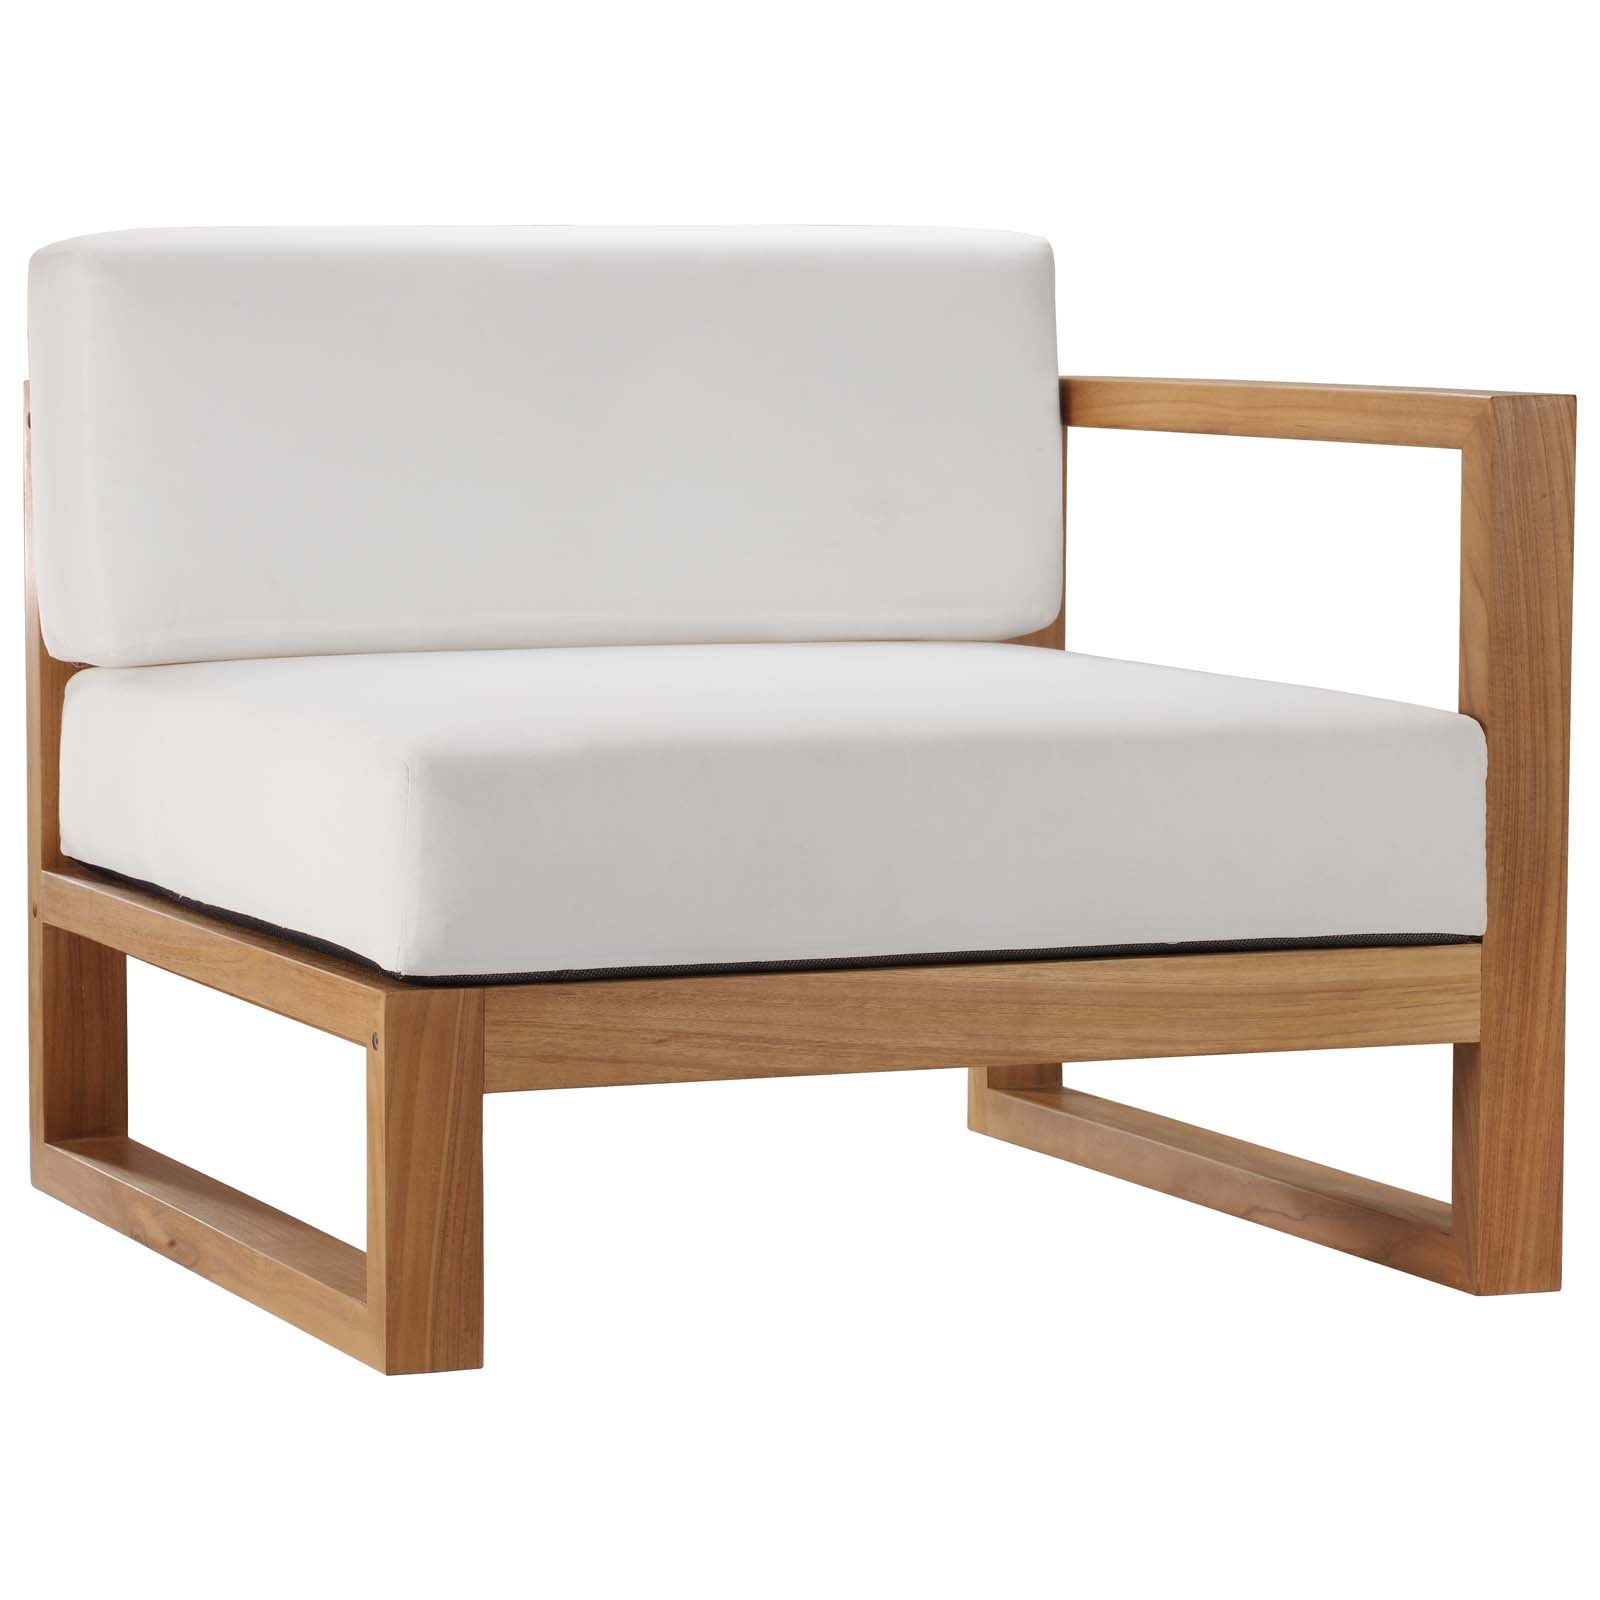 Upland Outdoor Patio Teak Wood Right-Arm Chair